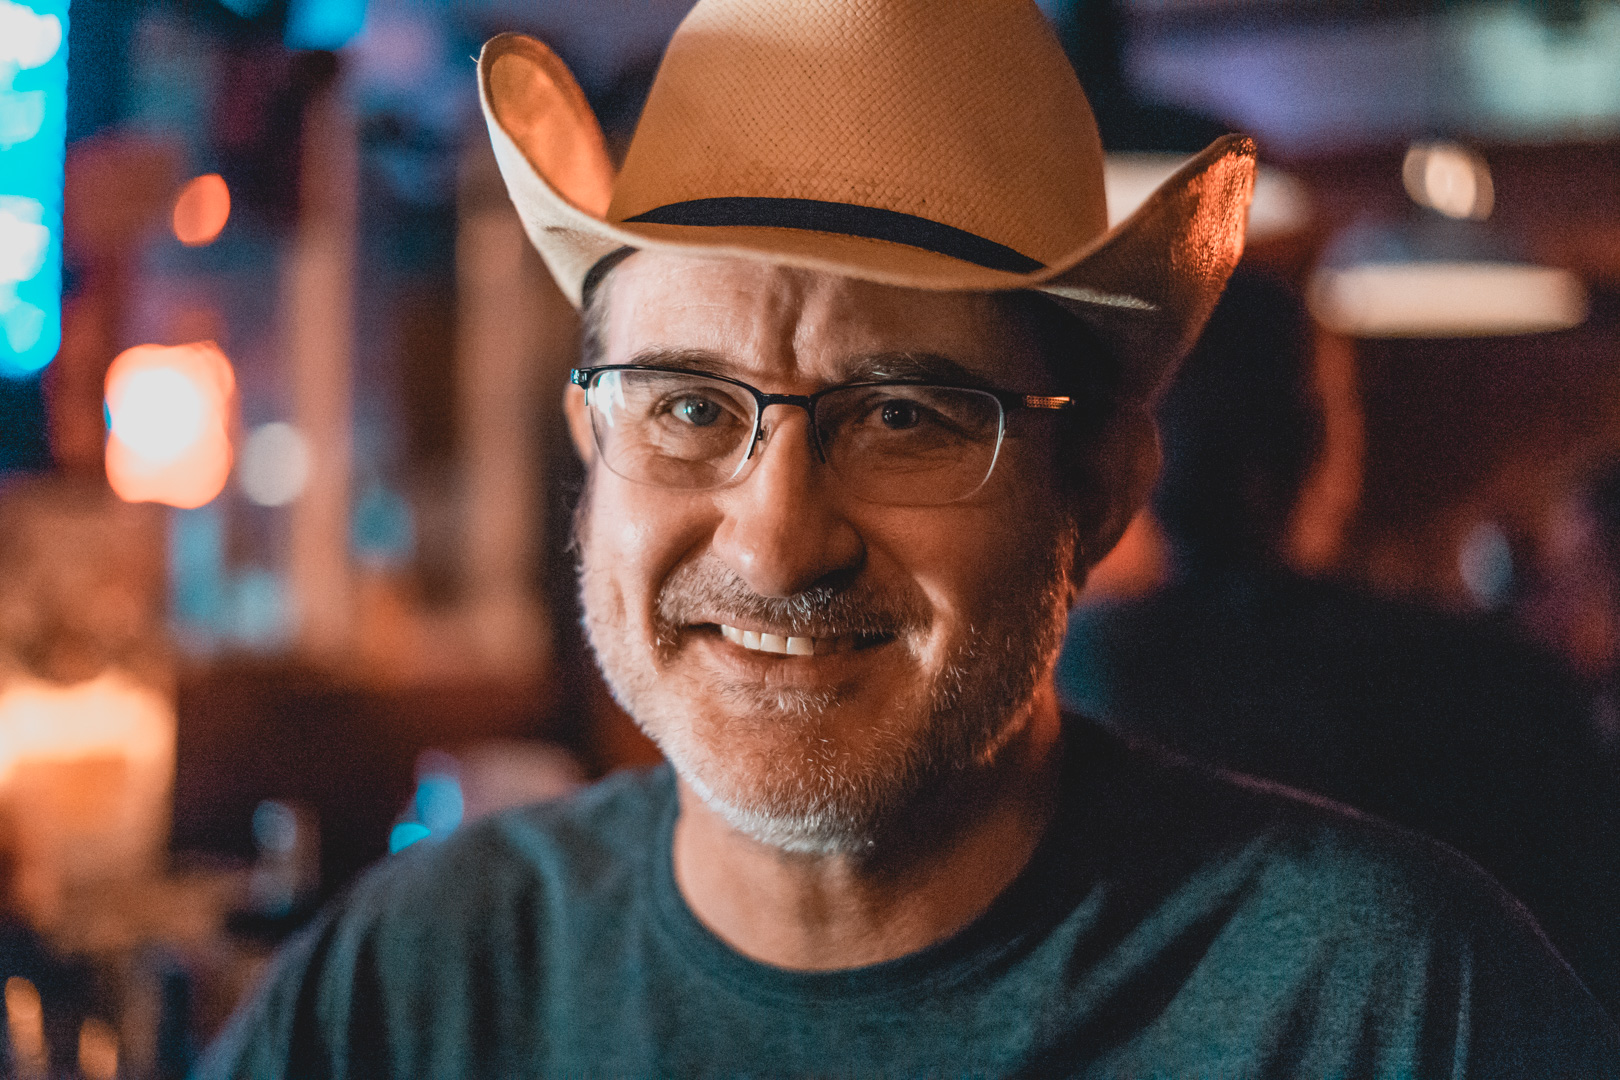 A portrait of a man in a cowboy hat smiling.